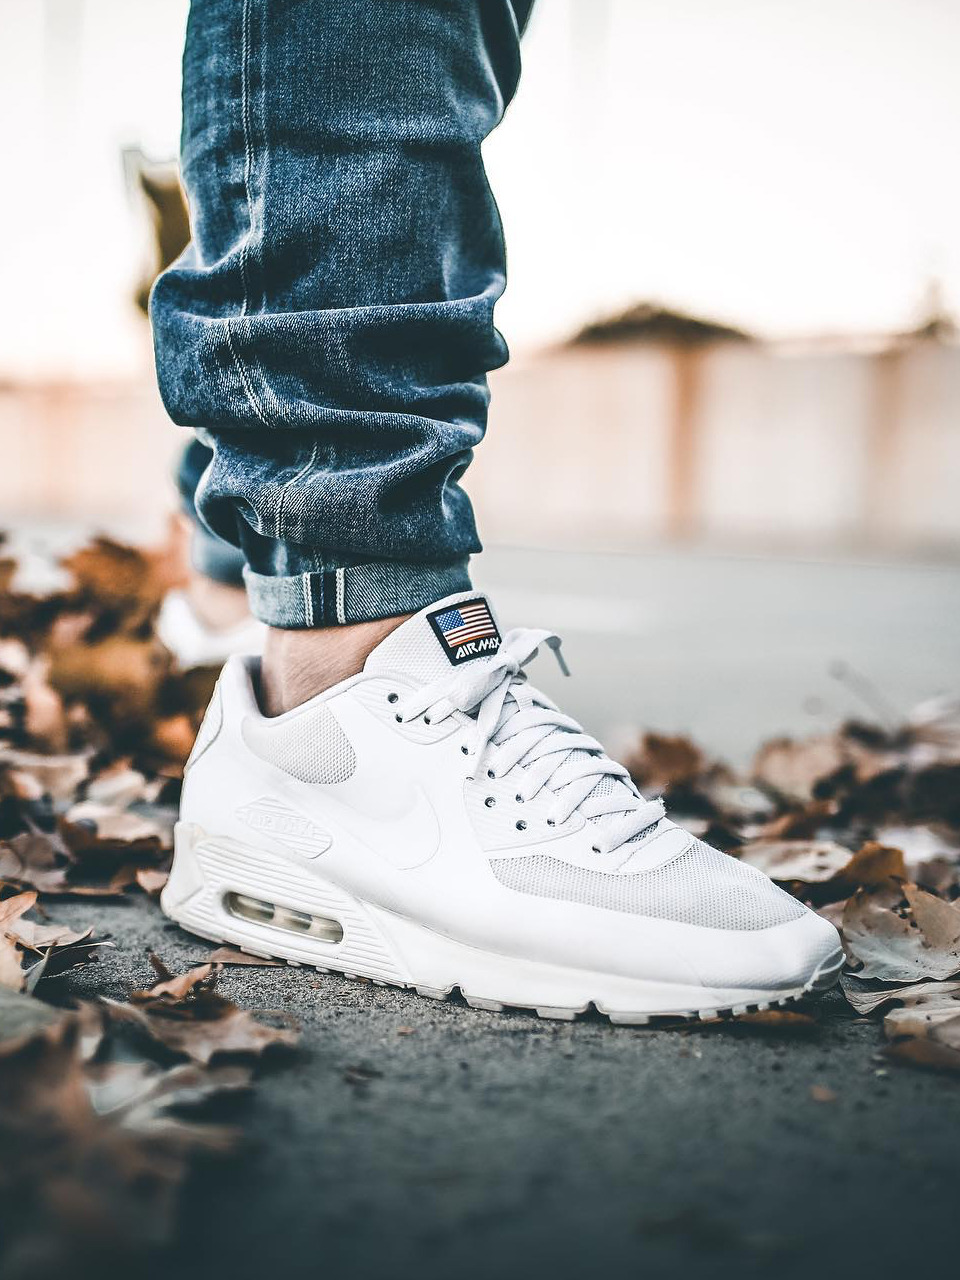 nike air max 90 independence day white